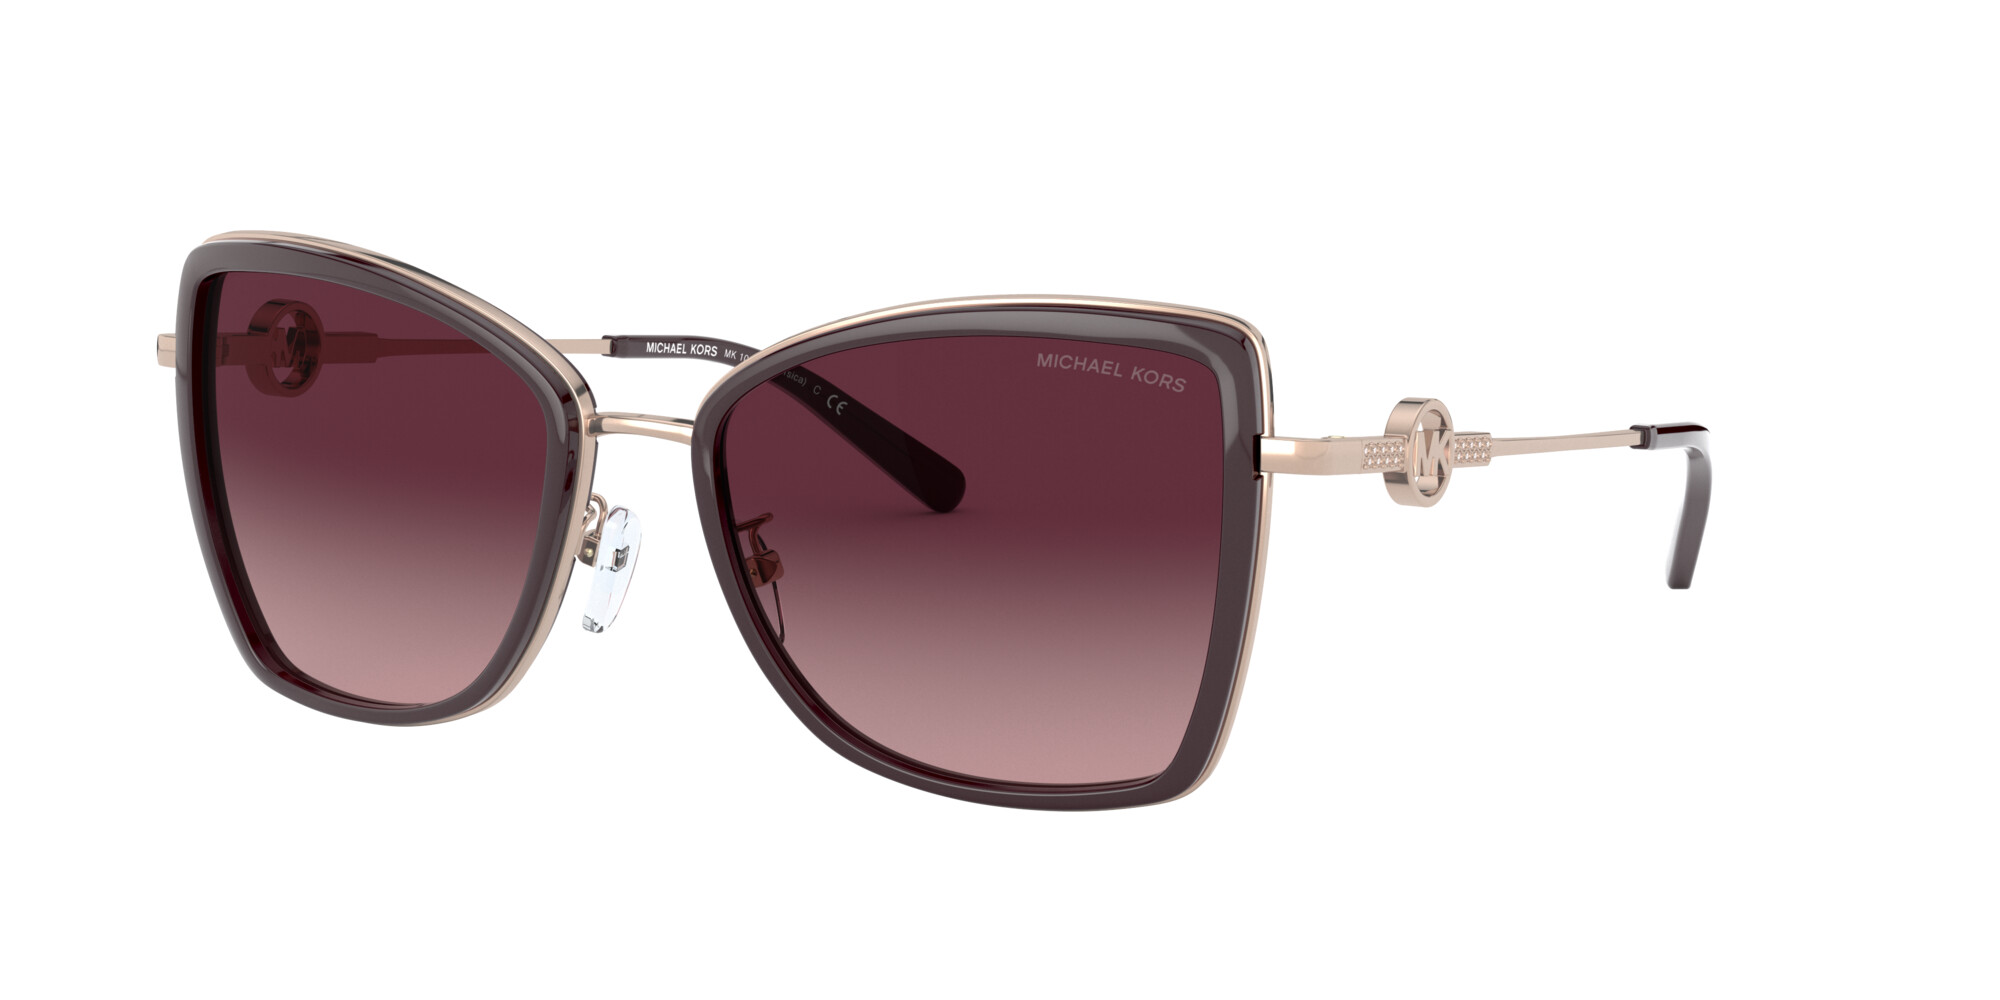 [products.image.angle_left01] Michael Kors CORSICA 0MK1067B 11088H Sonnenbrille